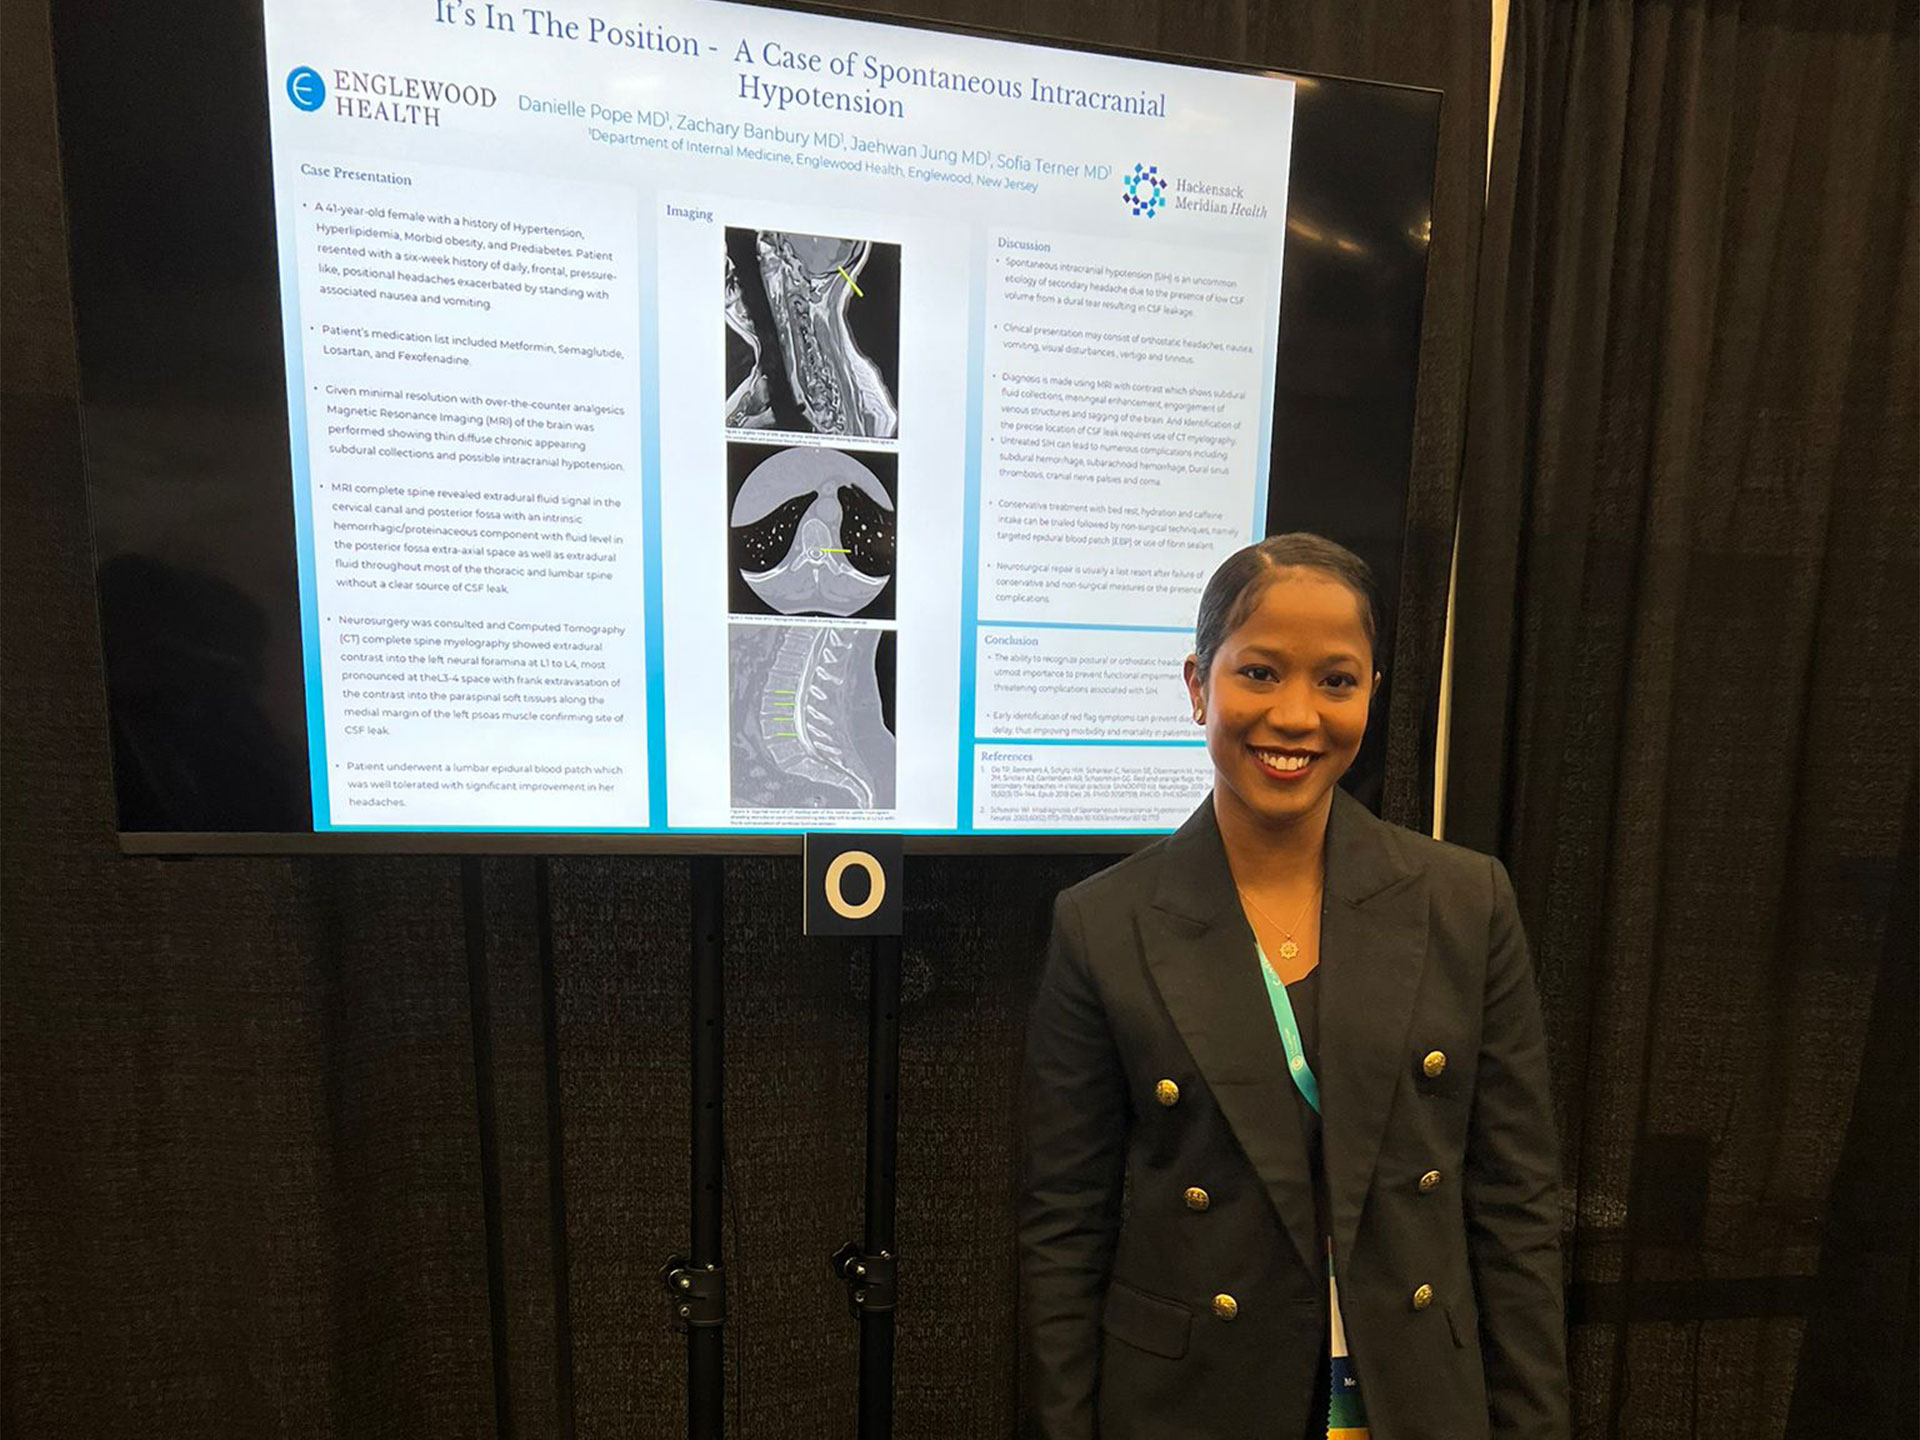 Englewood Hospital offers our residents with exposure to diverse pathologies as seen in this case presented by Danielle at SHM.